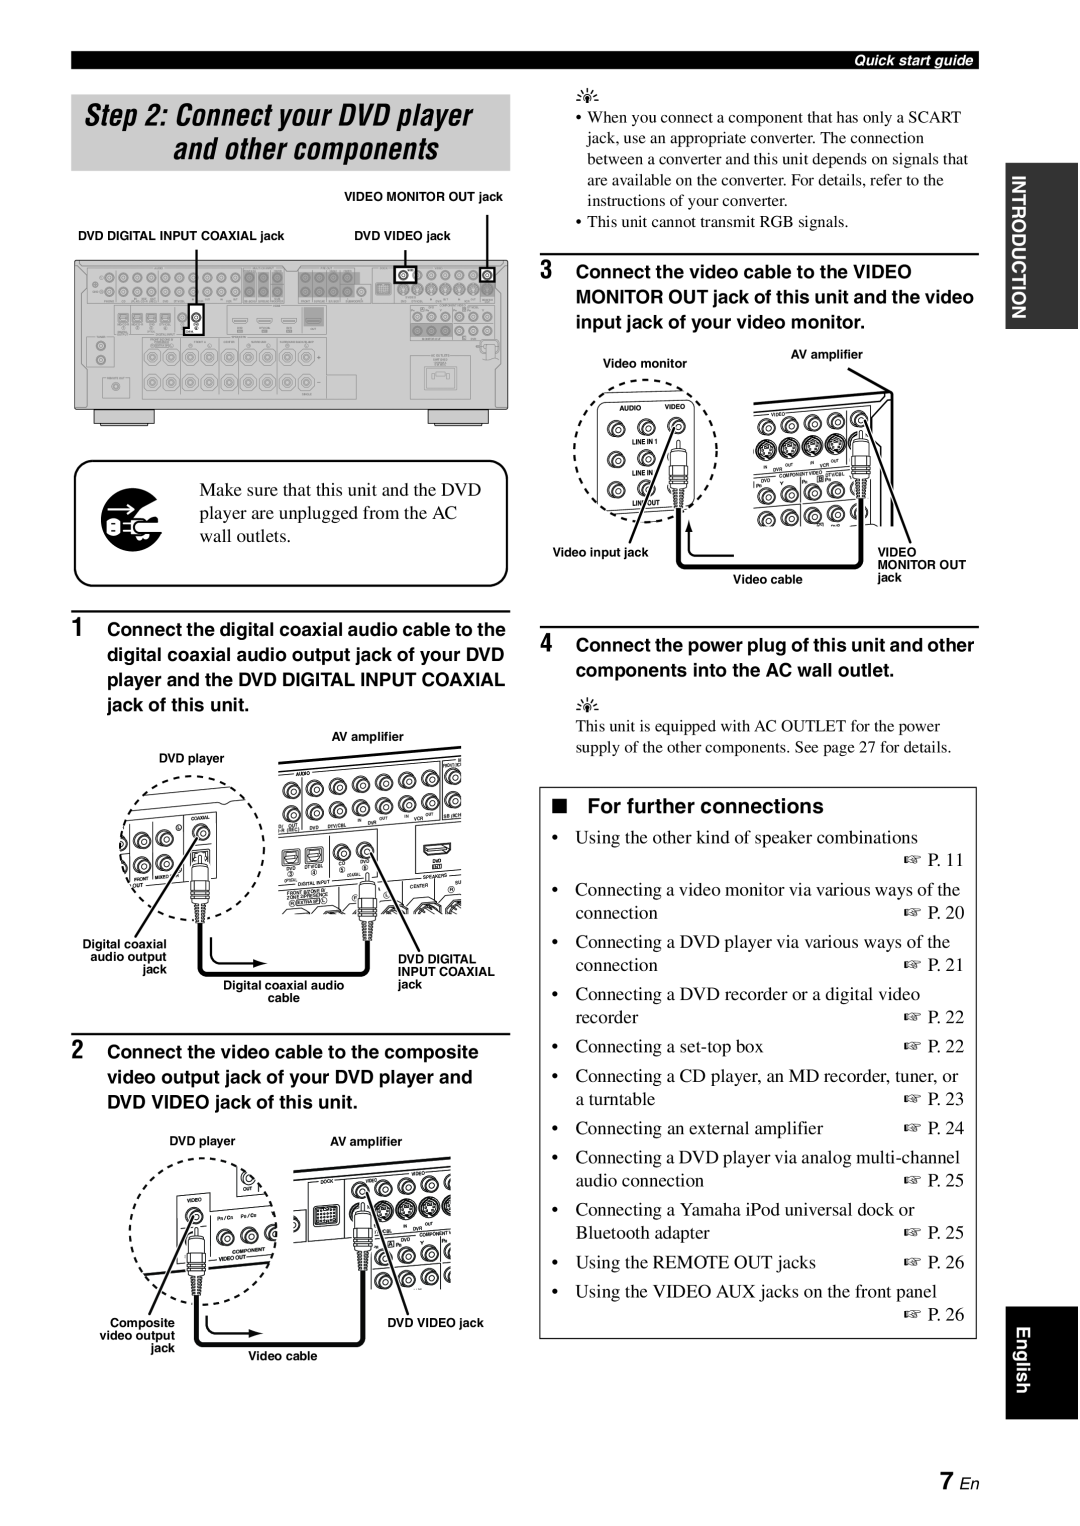 Yamaha DSP-AX863SE owner manual 7 En, For further connections, Connect the power plug of this unit and other 